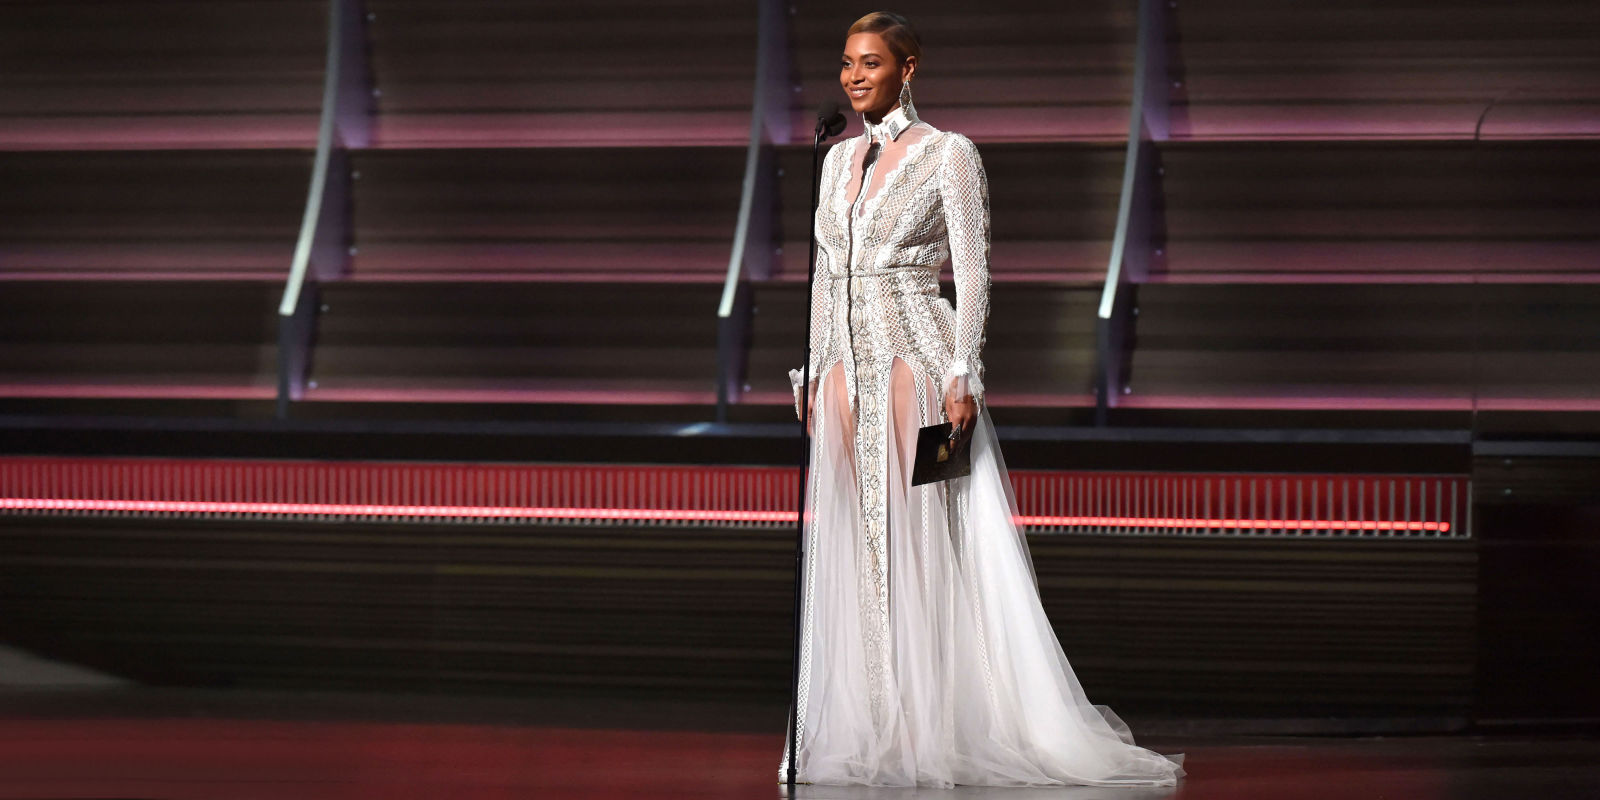 Beyoncé sparkles in an Inbal Dror wedding dress at the Grammy Awards. Photo by Getty